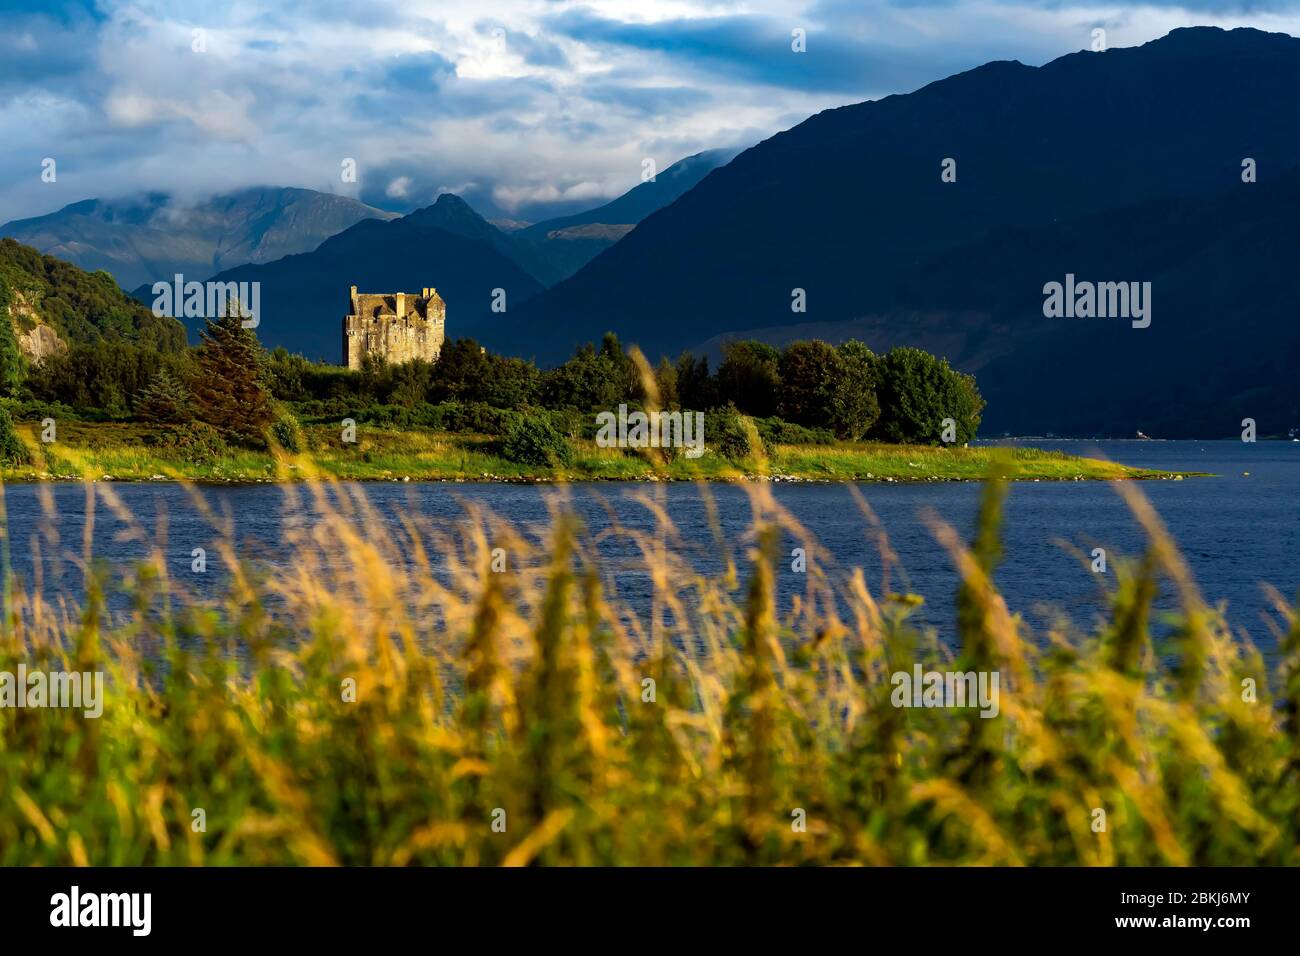 United Kingdom, Scotland, Highlands, Ross & Cromarty County, Dornie, Eilean Donan Castle at the entrance to Loch Duich Stock Photo